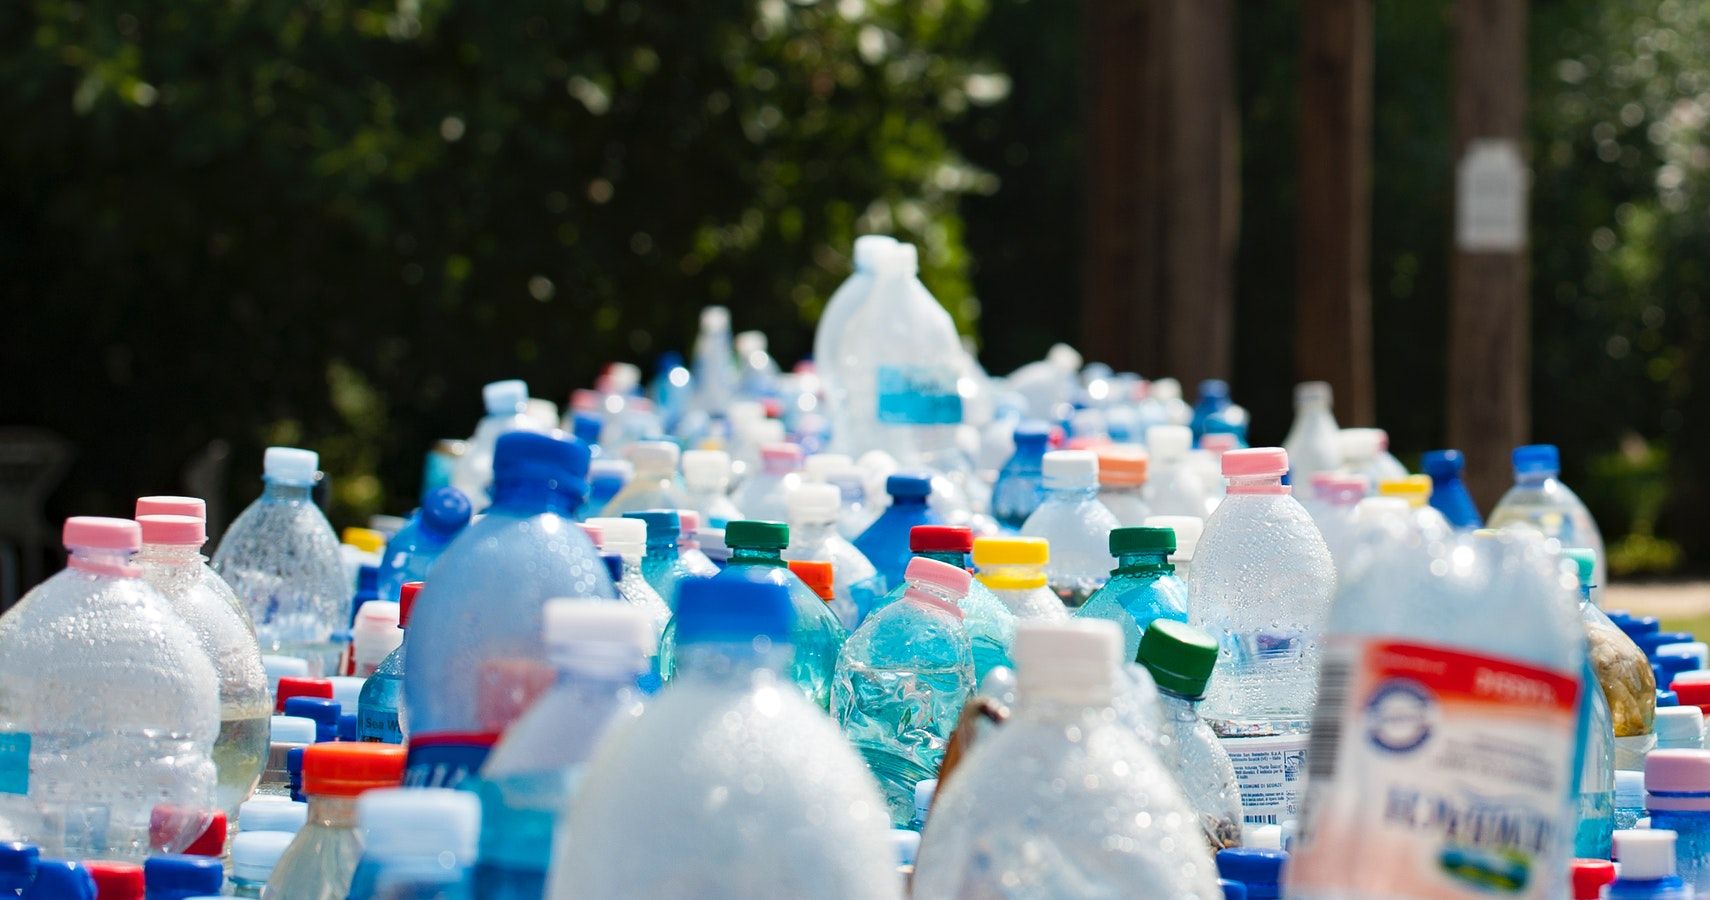 Chemicals In Plastic May Increase Risk Of Postpartum Depression